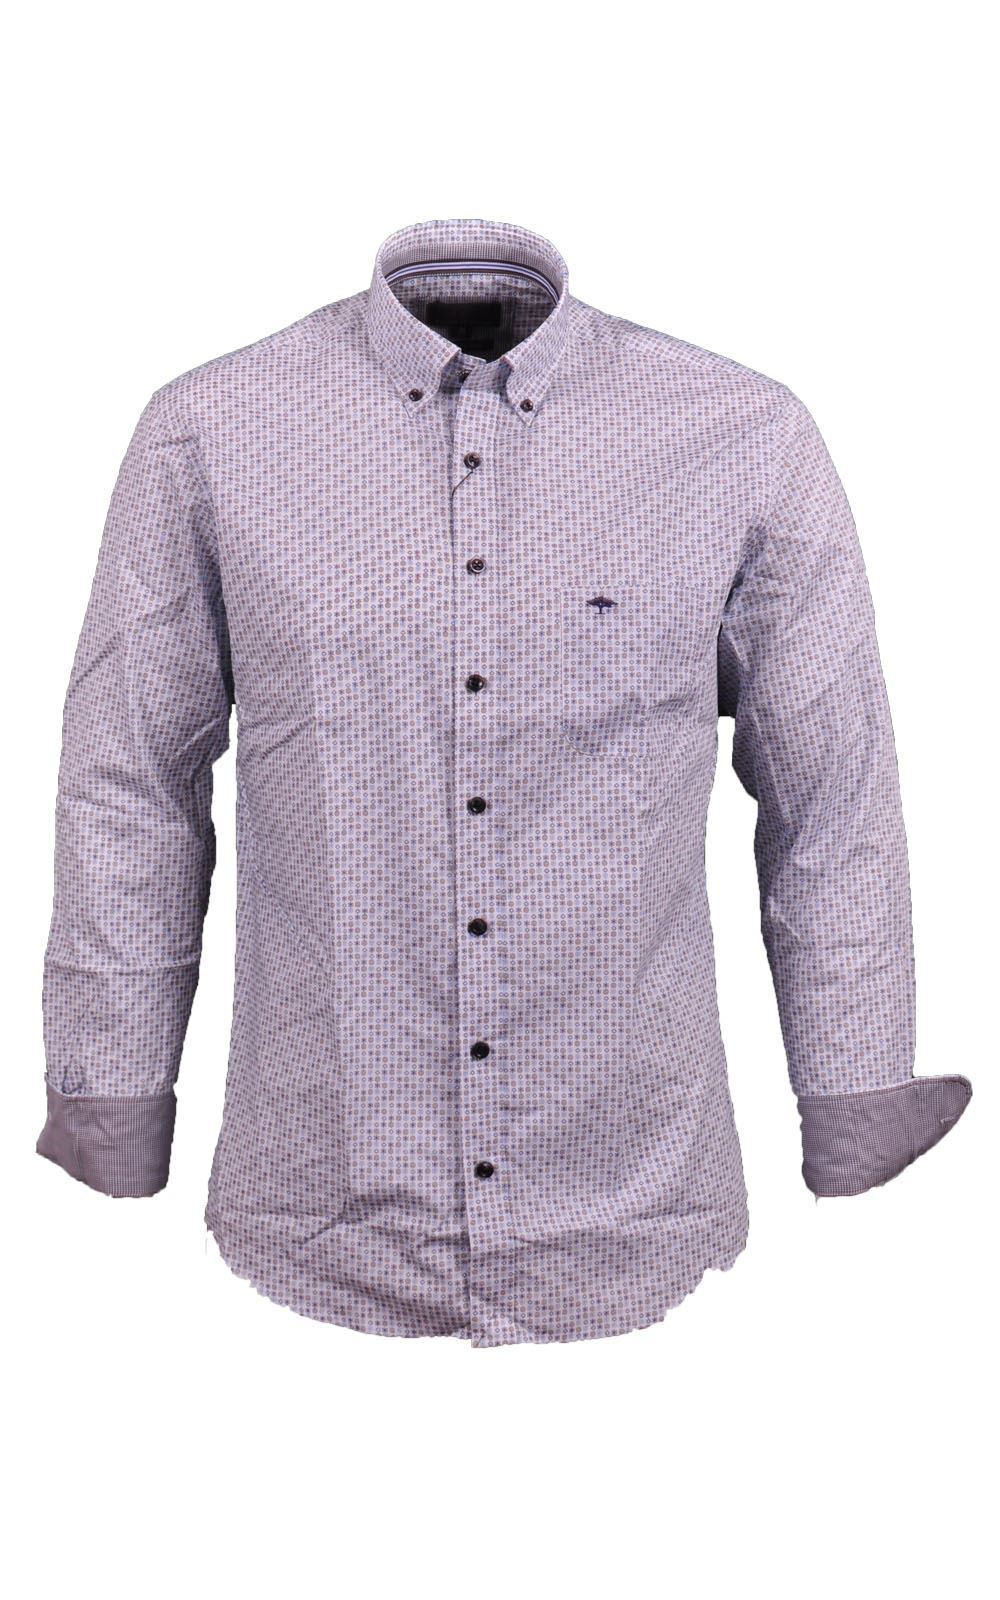 Picture of Fynch Hatton Long Sleeve Shirt 1120-8030